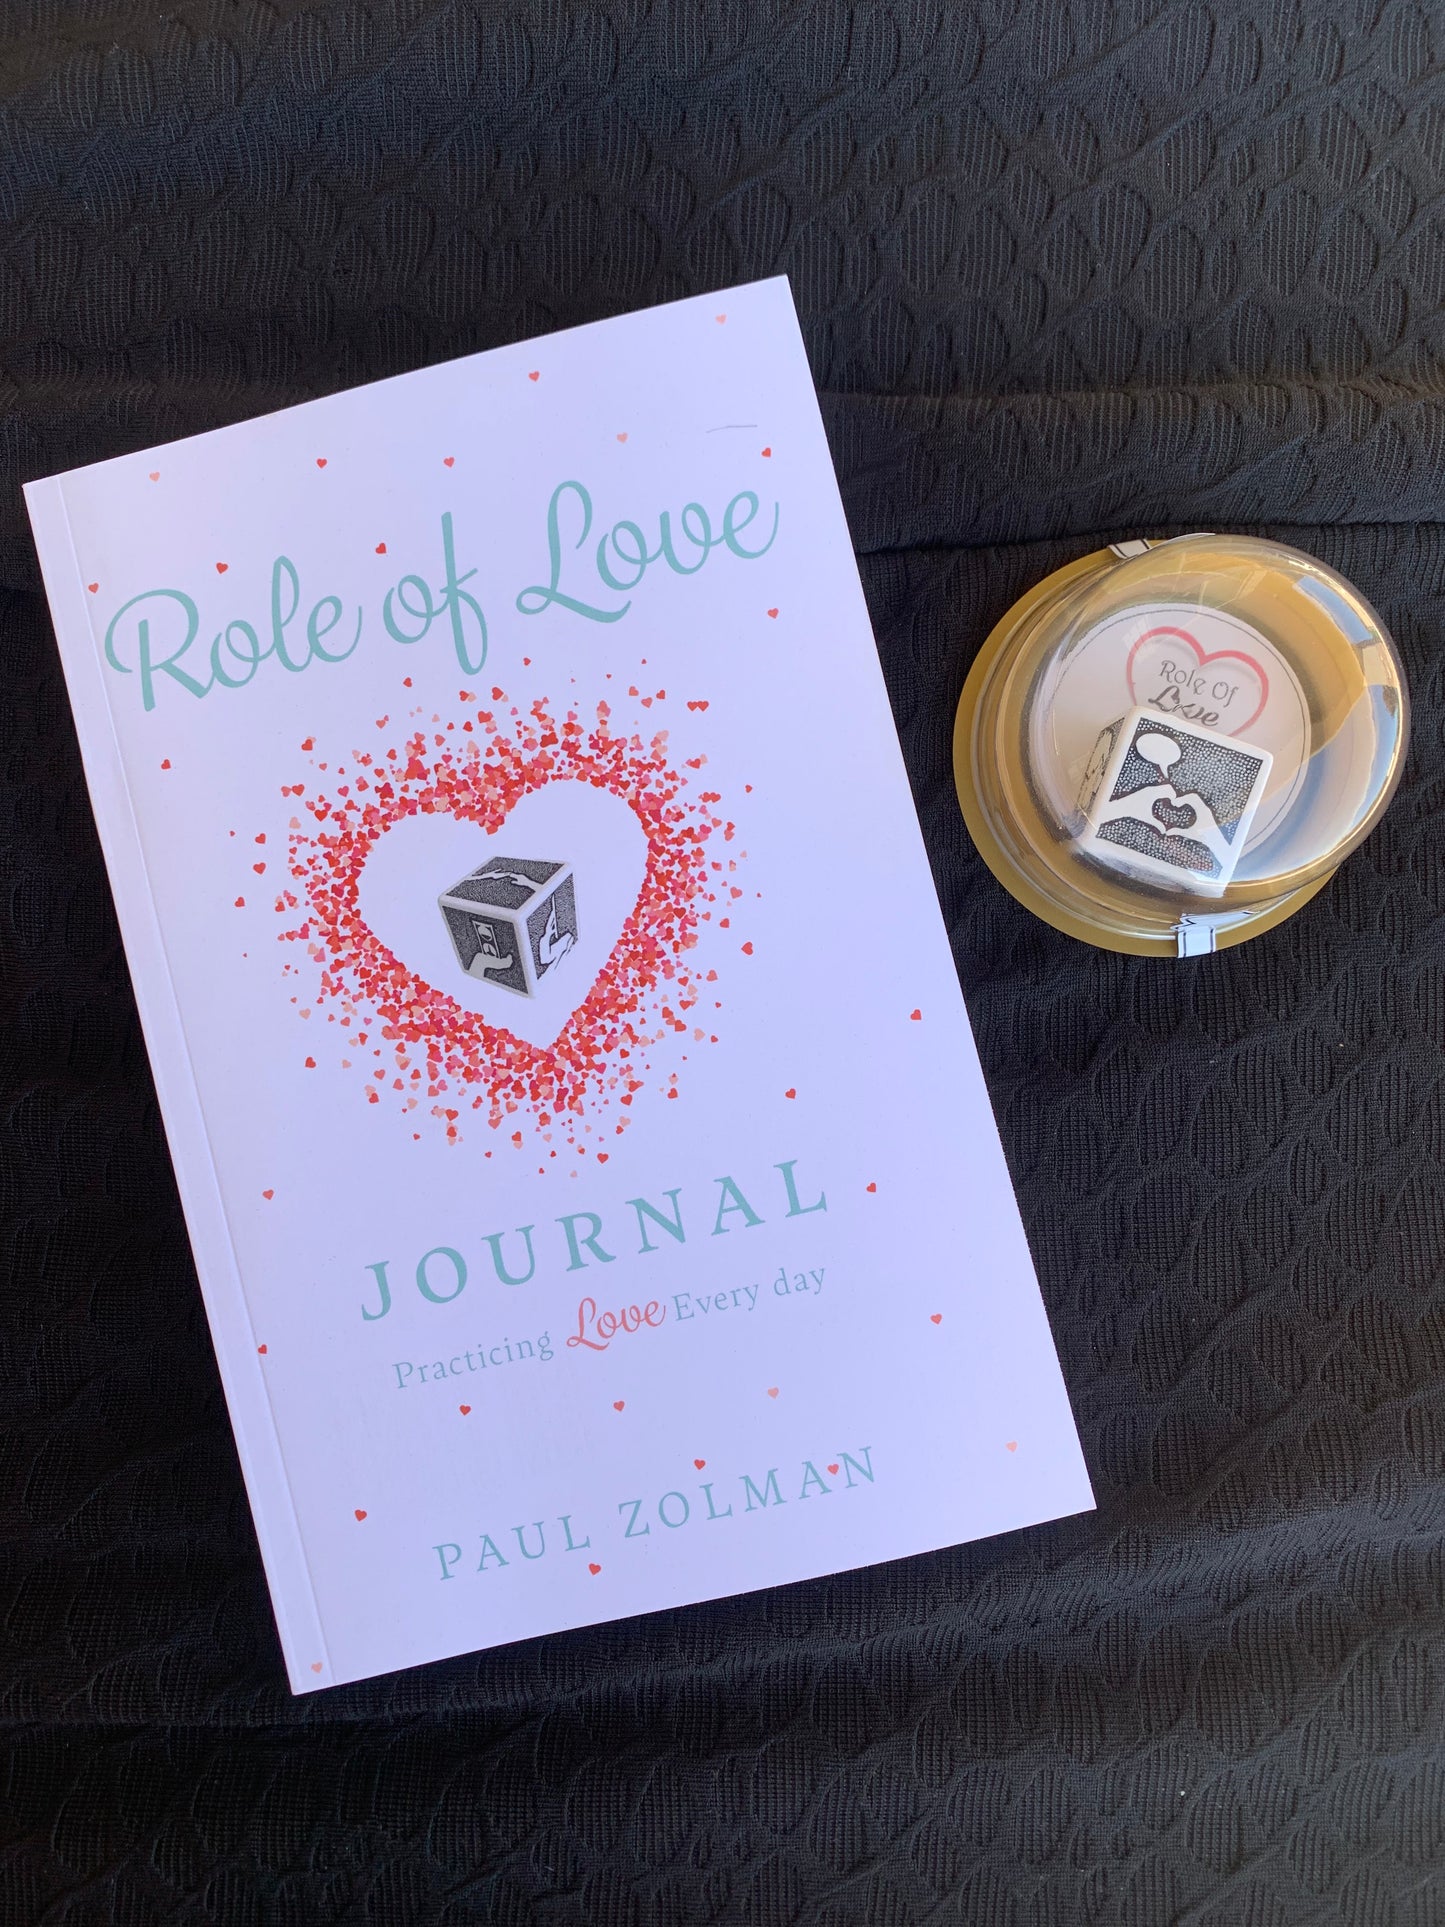 role of love journal and cube